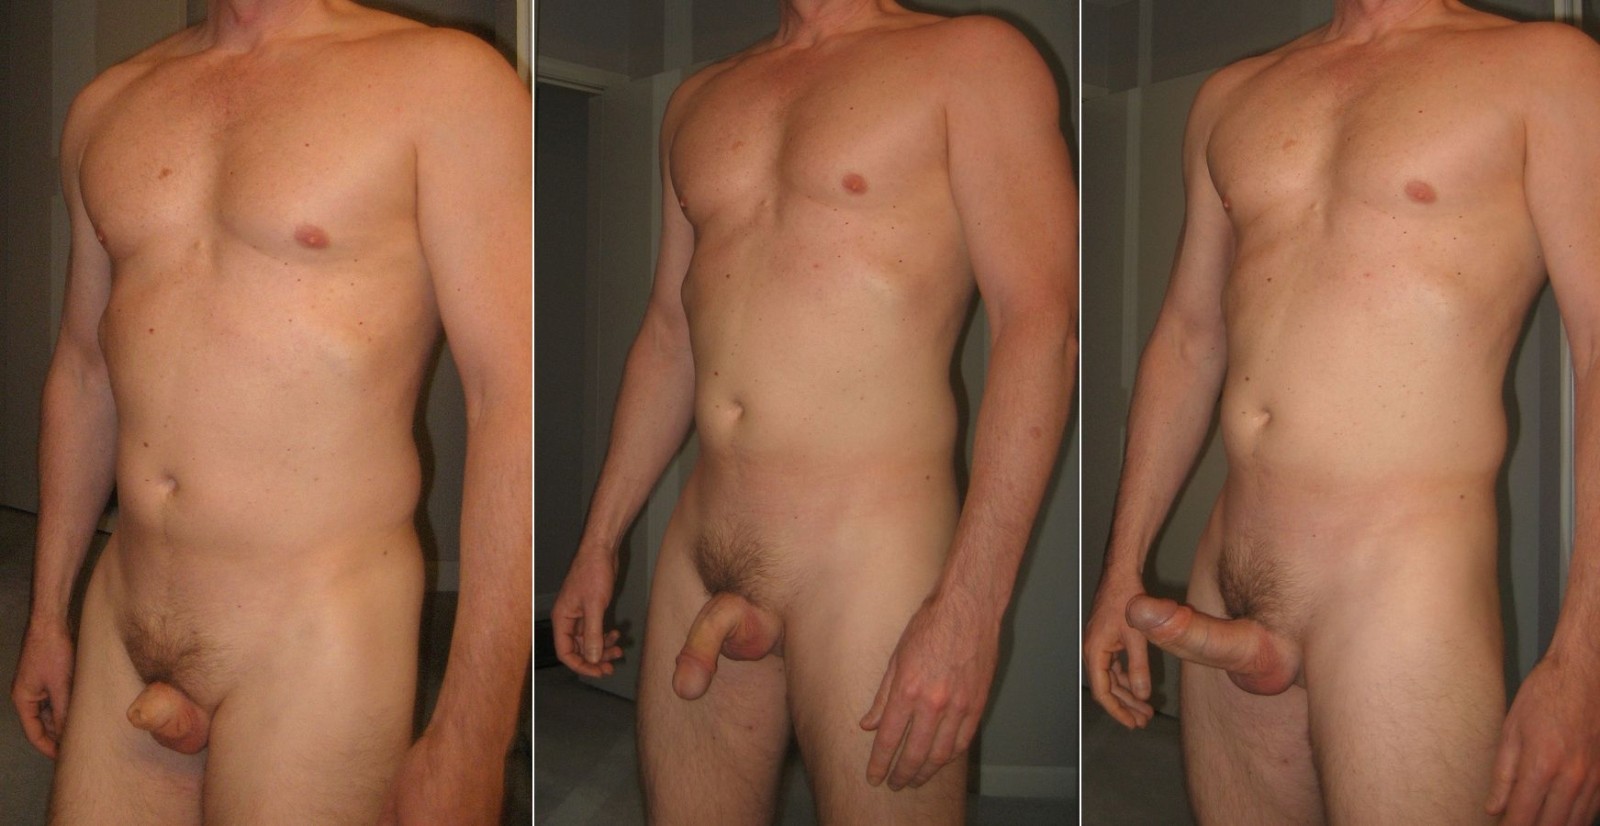 Men with shaved genitals pictures